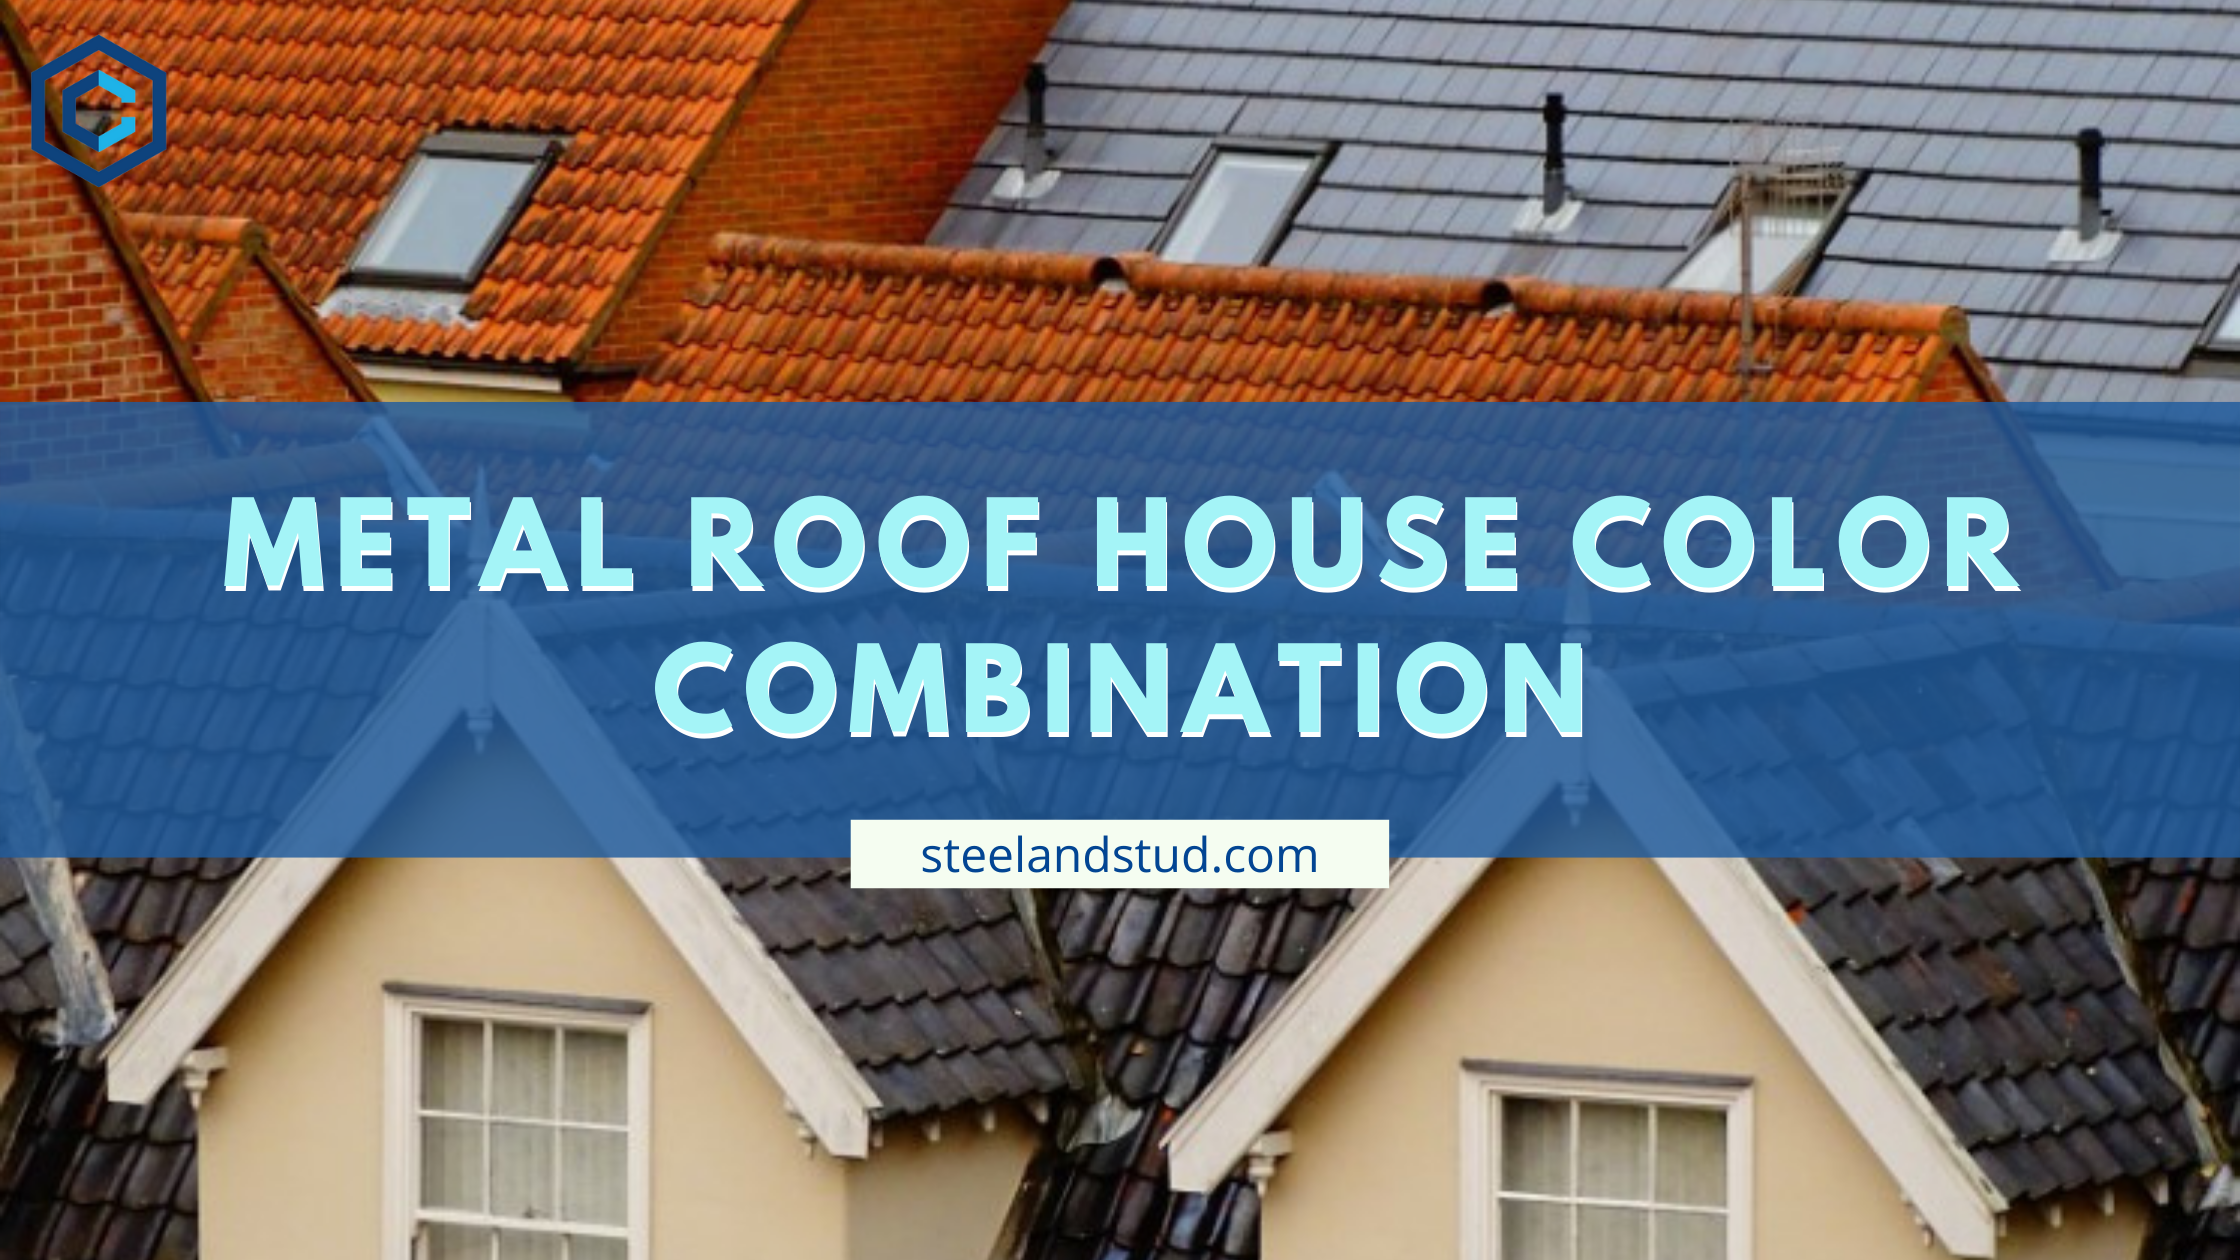 Metal Roof House Color Combination